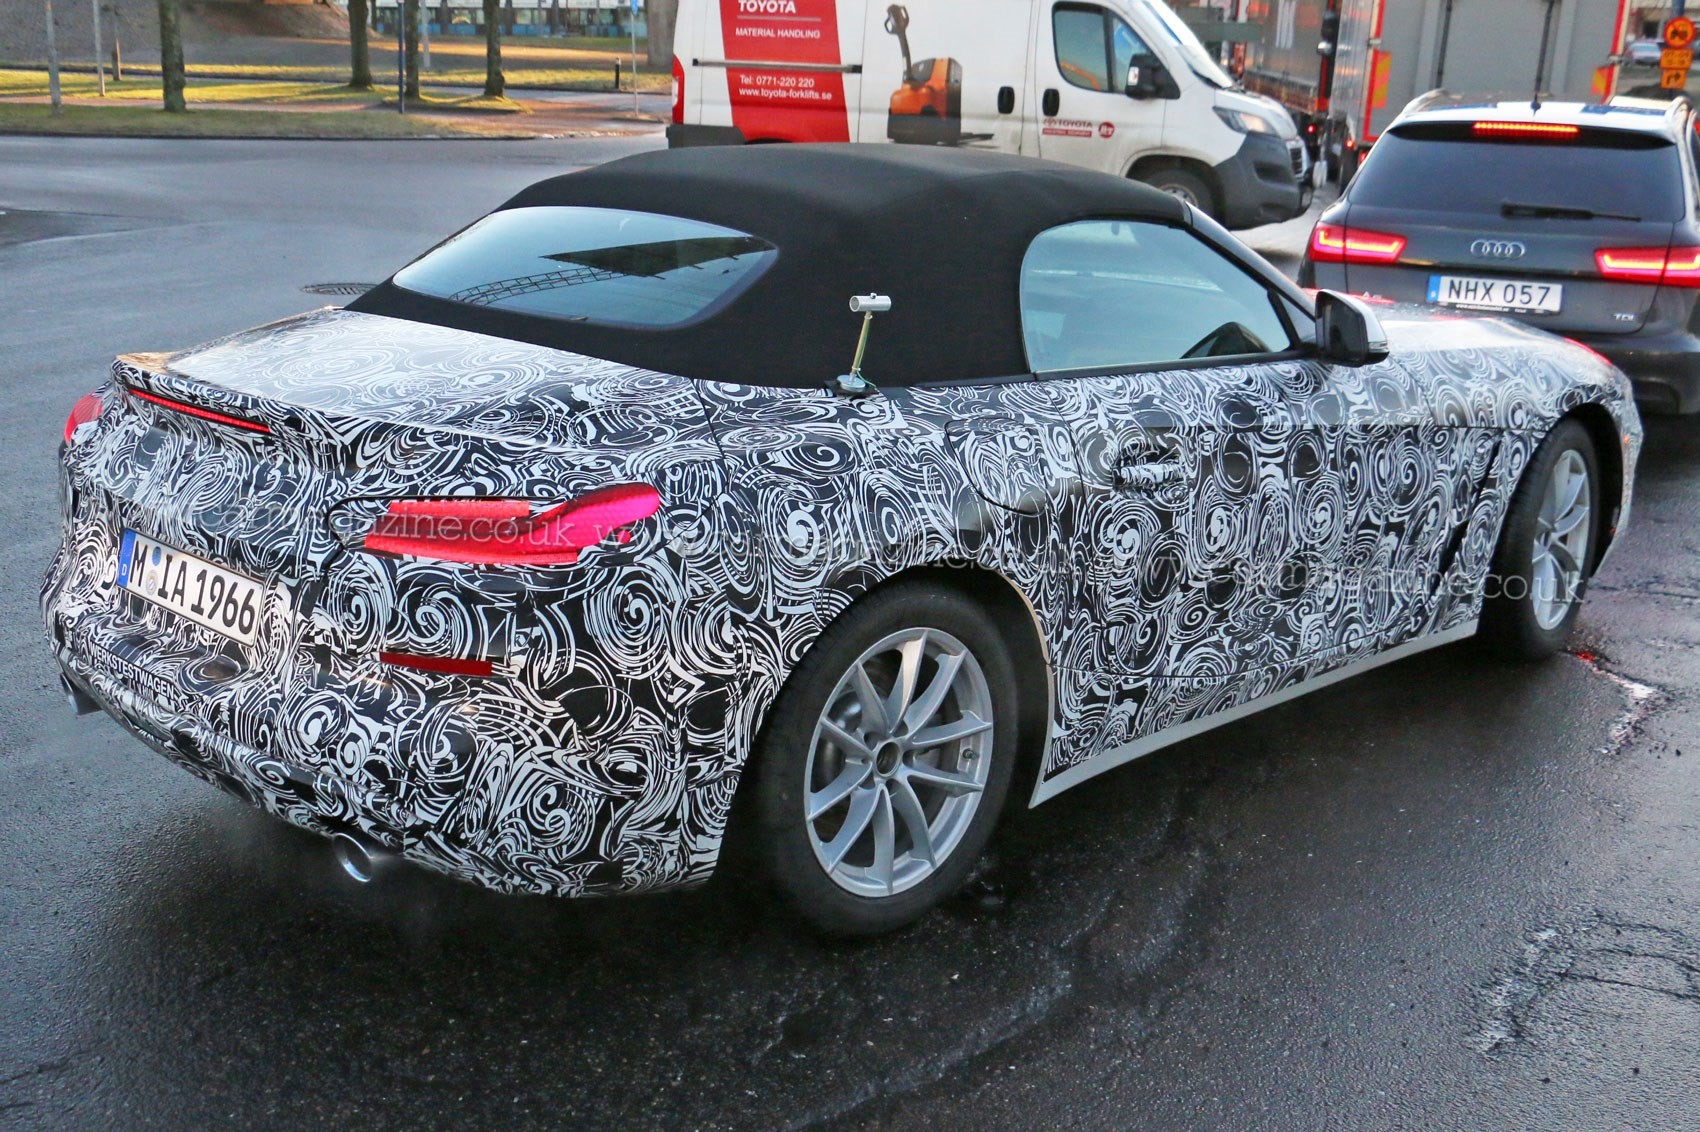 New BMW Z4 front